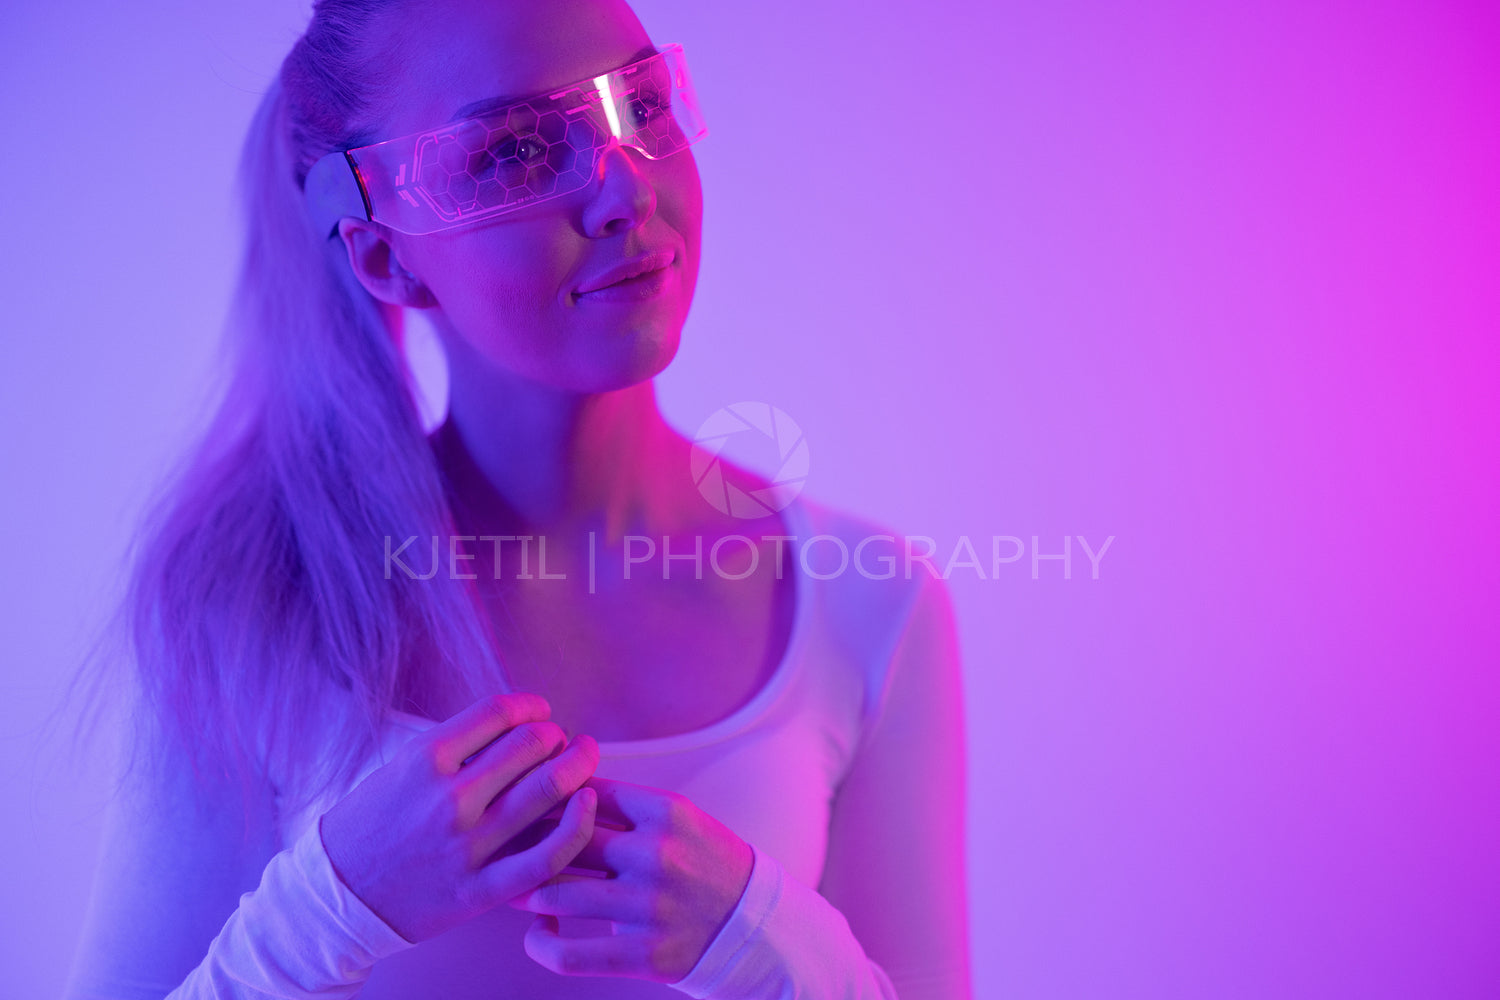 Futuristic Woman with Stylish Holographic Glasses